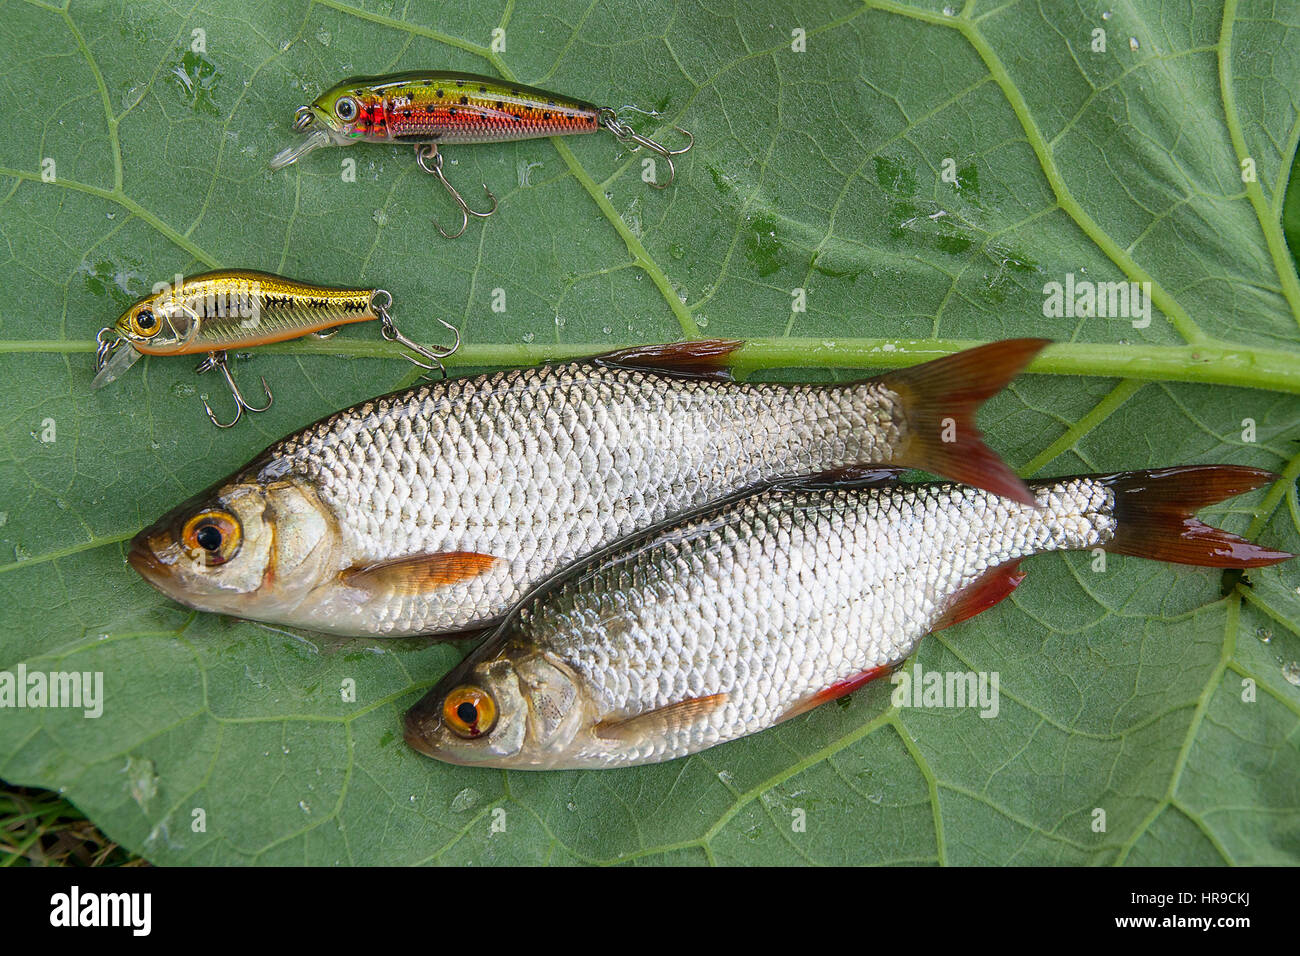 https://c8.alamy.com/comp/HR9CKJ/freshwater-fish-just-taken-from-the-water-common-rudd-fish-and-several-HR9CKJ.jpg